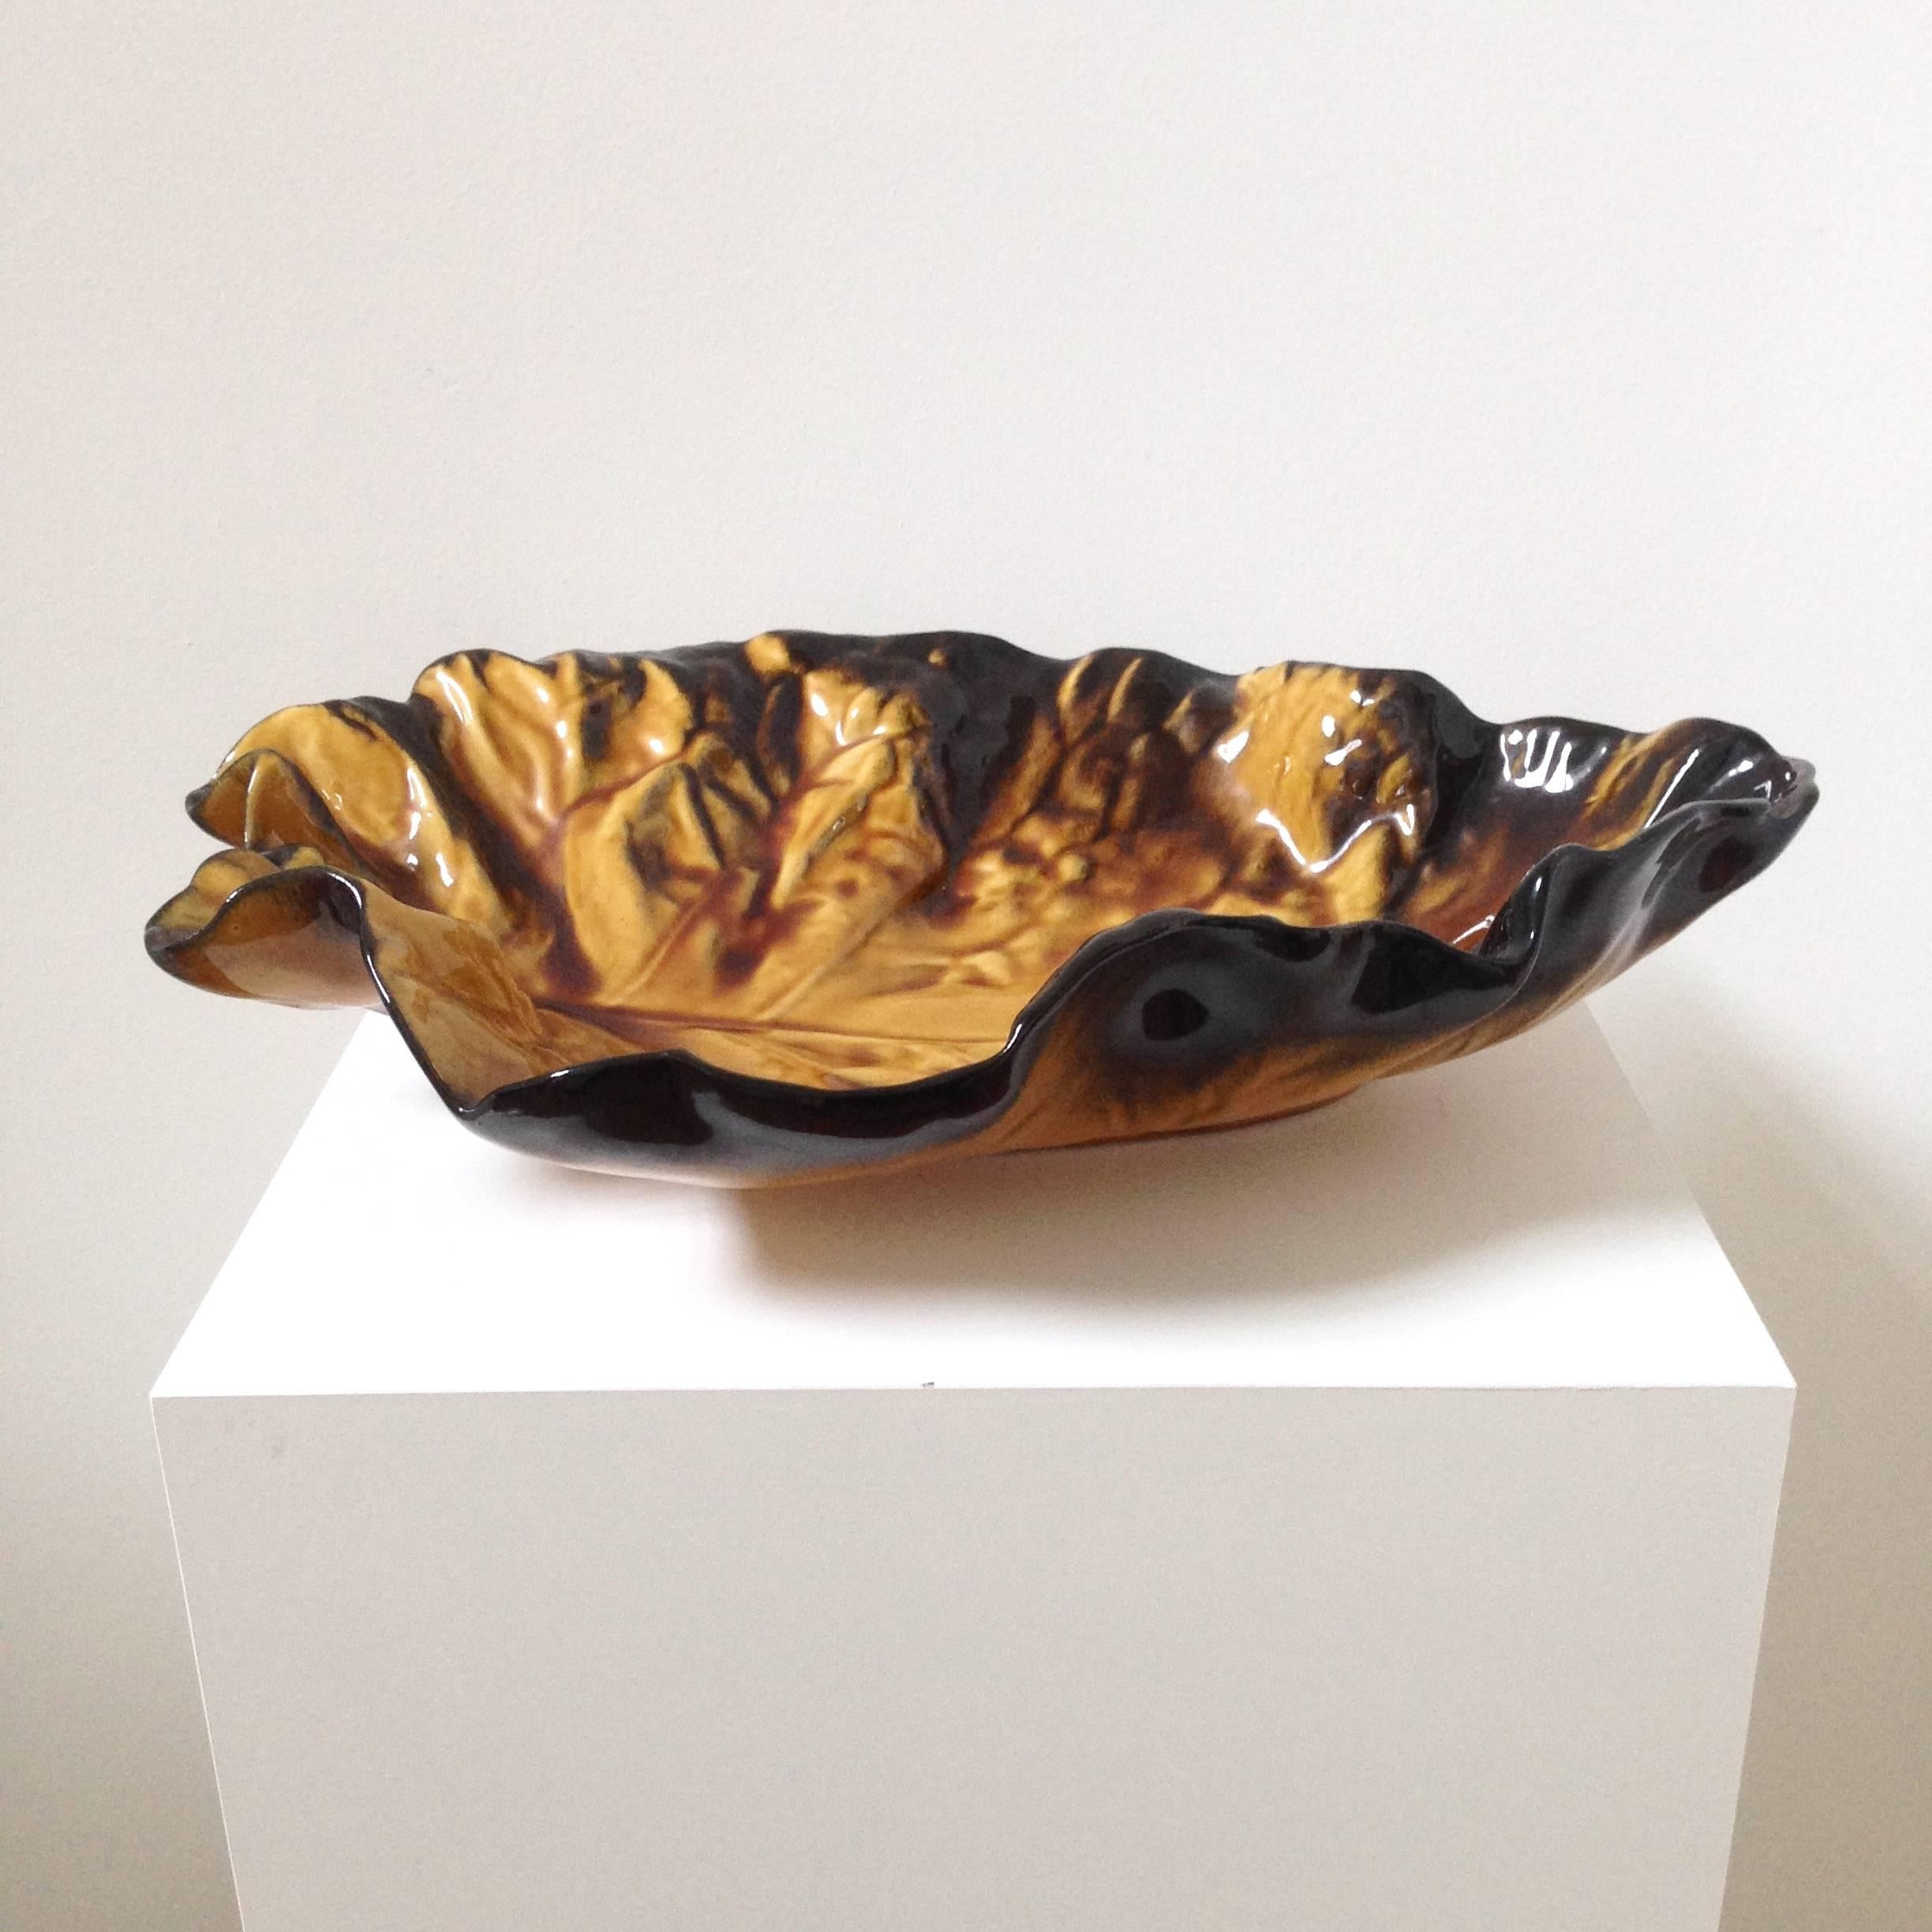 Fantastic sculptural ceramic bowl by the French potier Pol Chambost in the form of a gorgeous fall leaf. Terrific scale at nearly 17